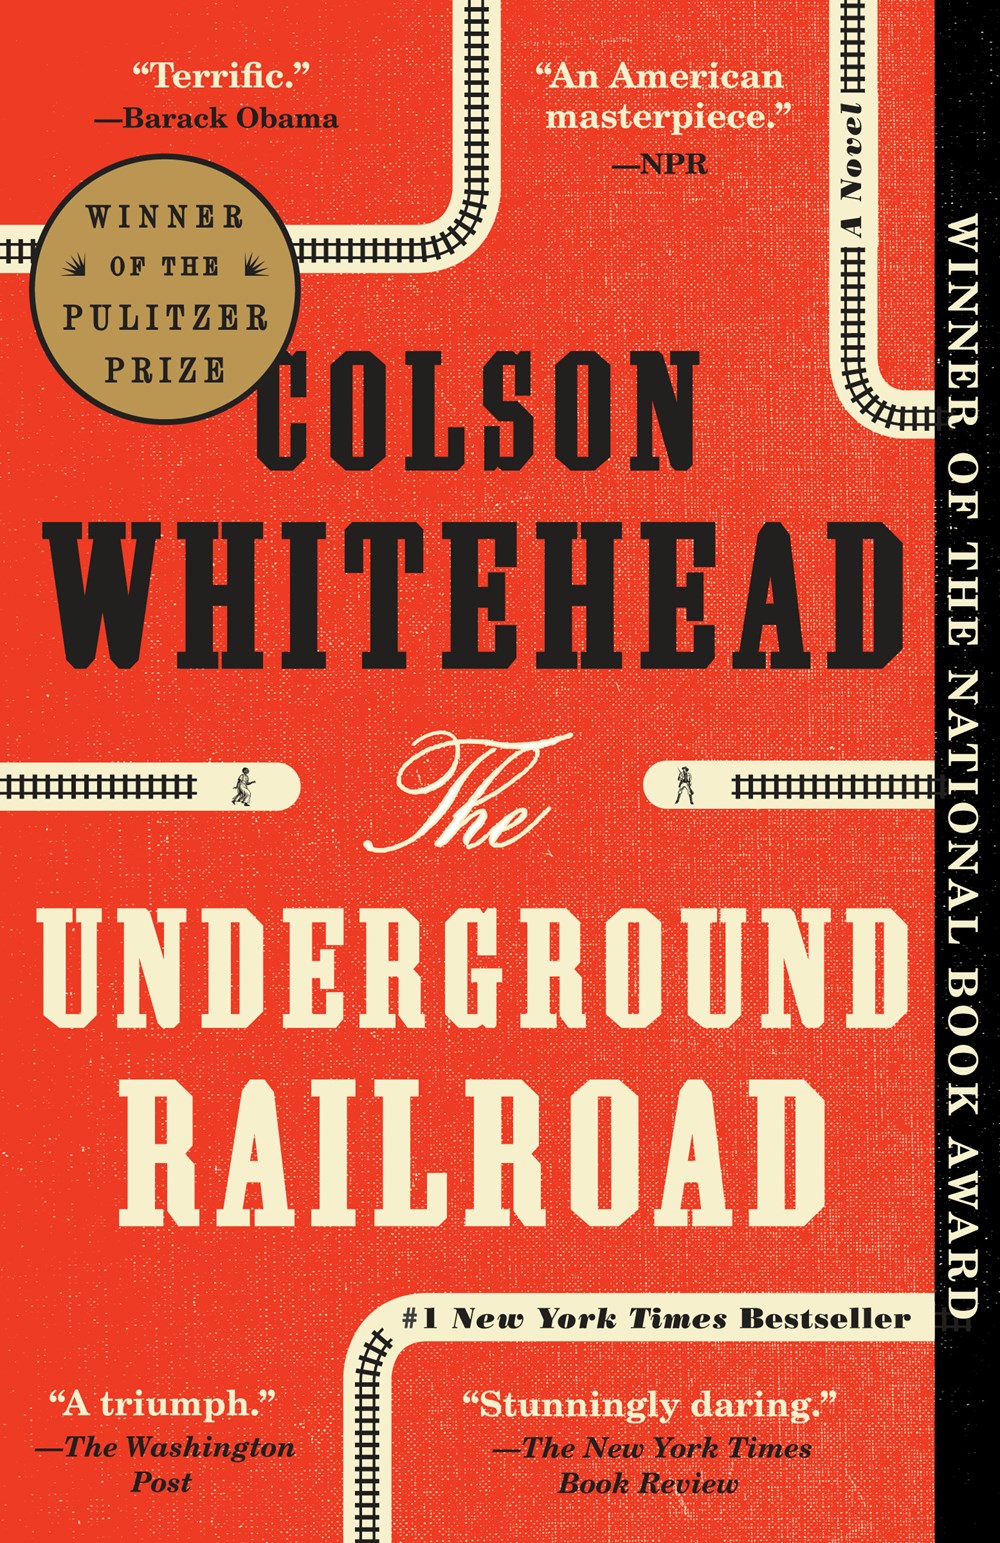 The Underground Railroad: A Novel by Colson Whitehead